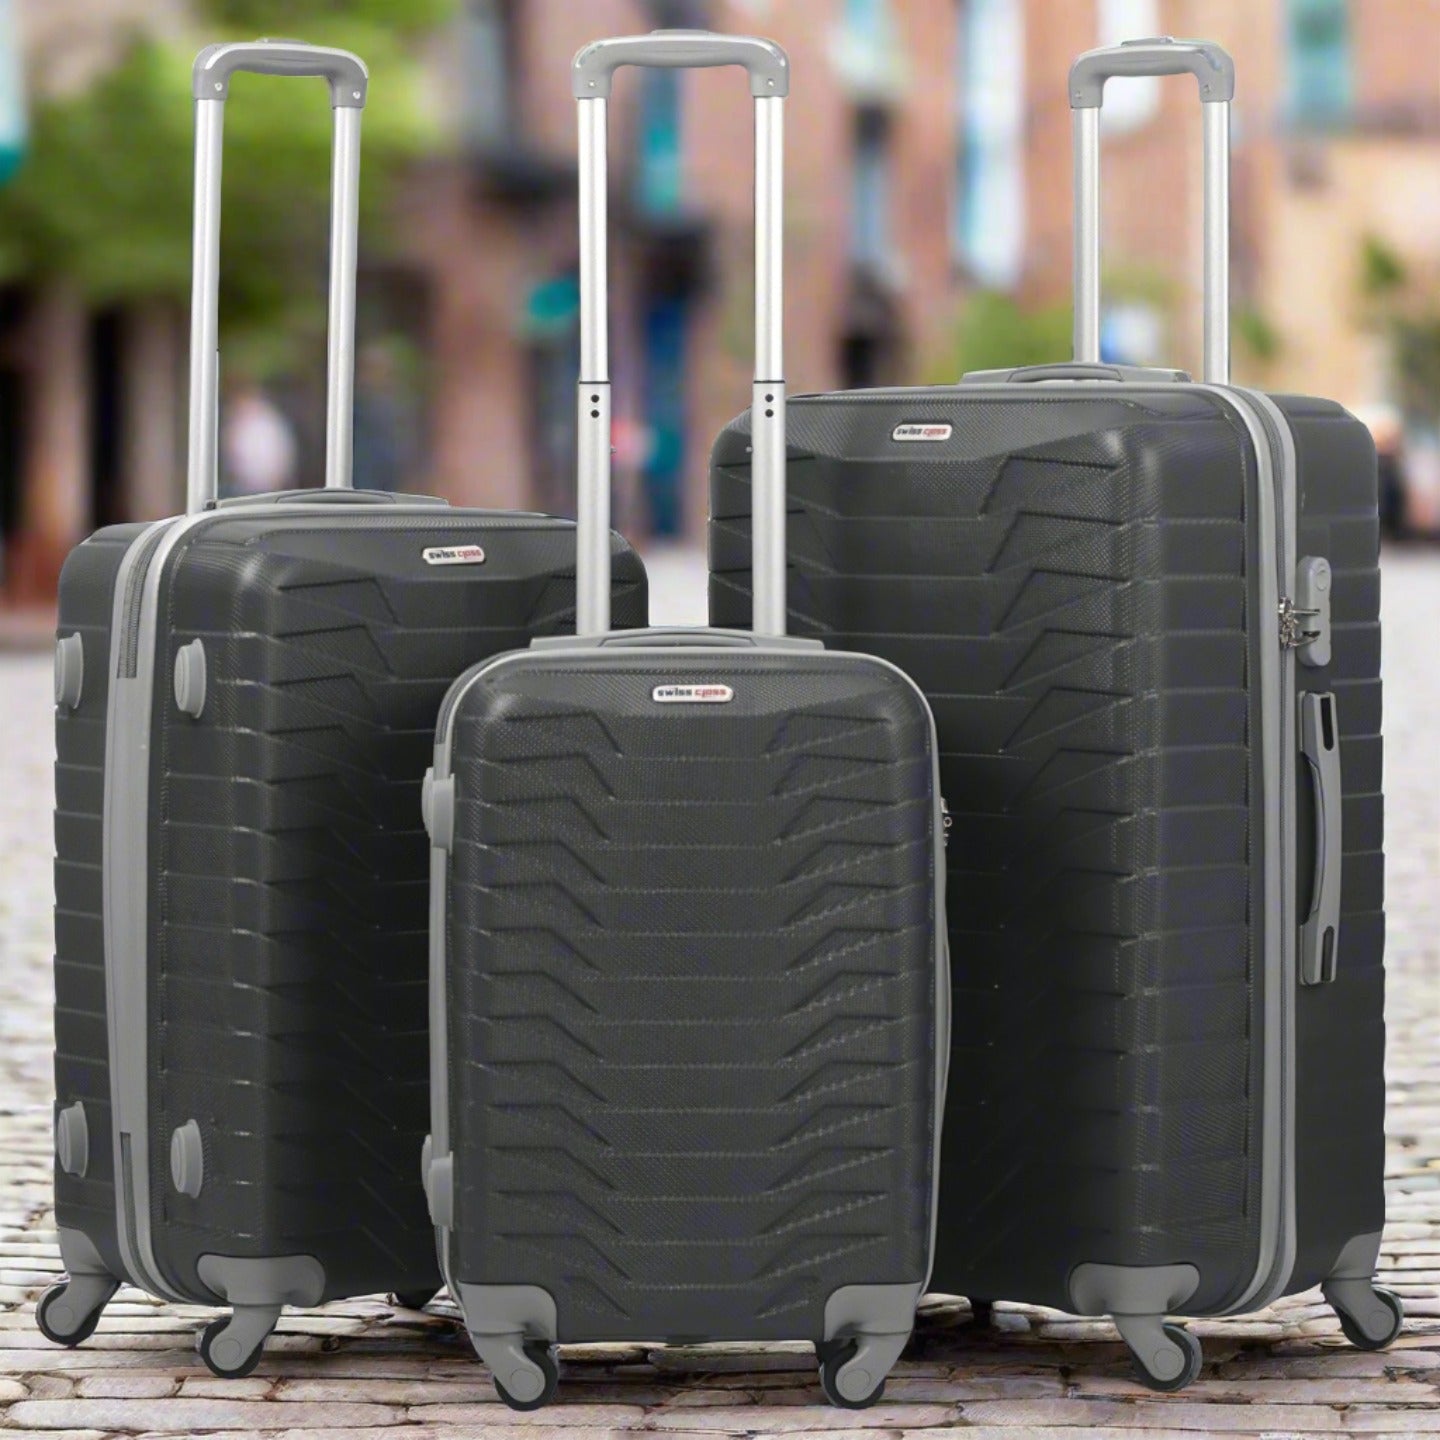 Swiss Class Lightweight ABS Luggage Bags with Spinner Wheels | 20, 24, 28 Inches